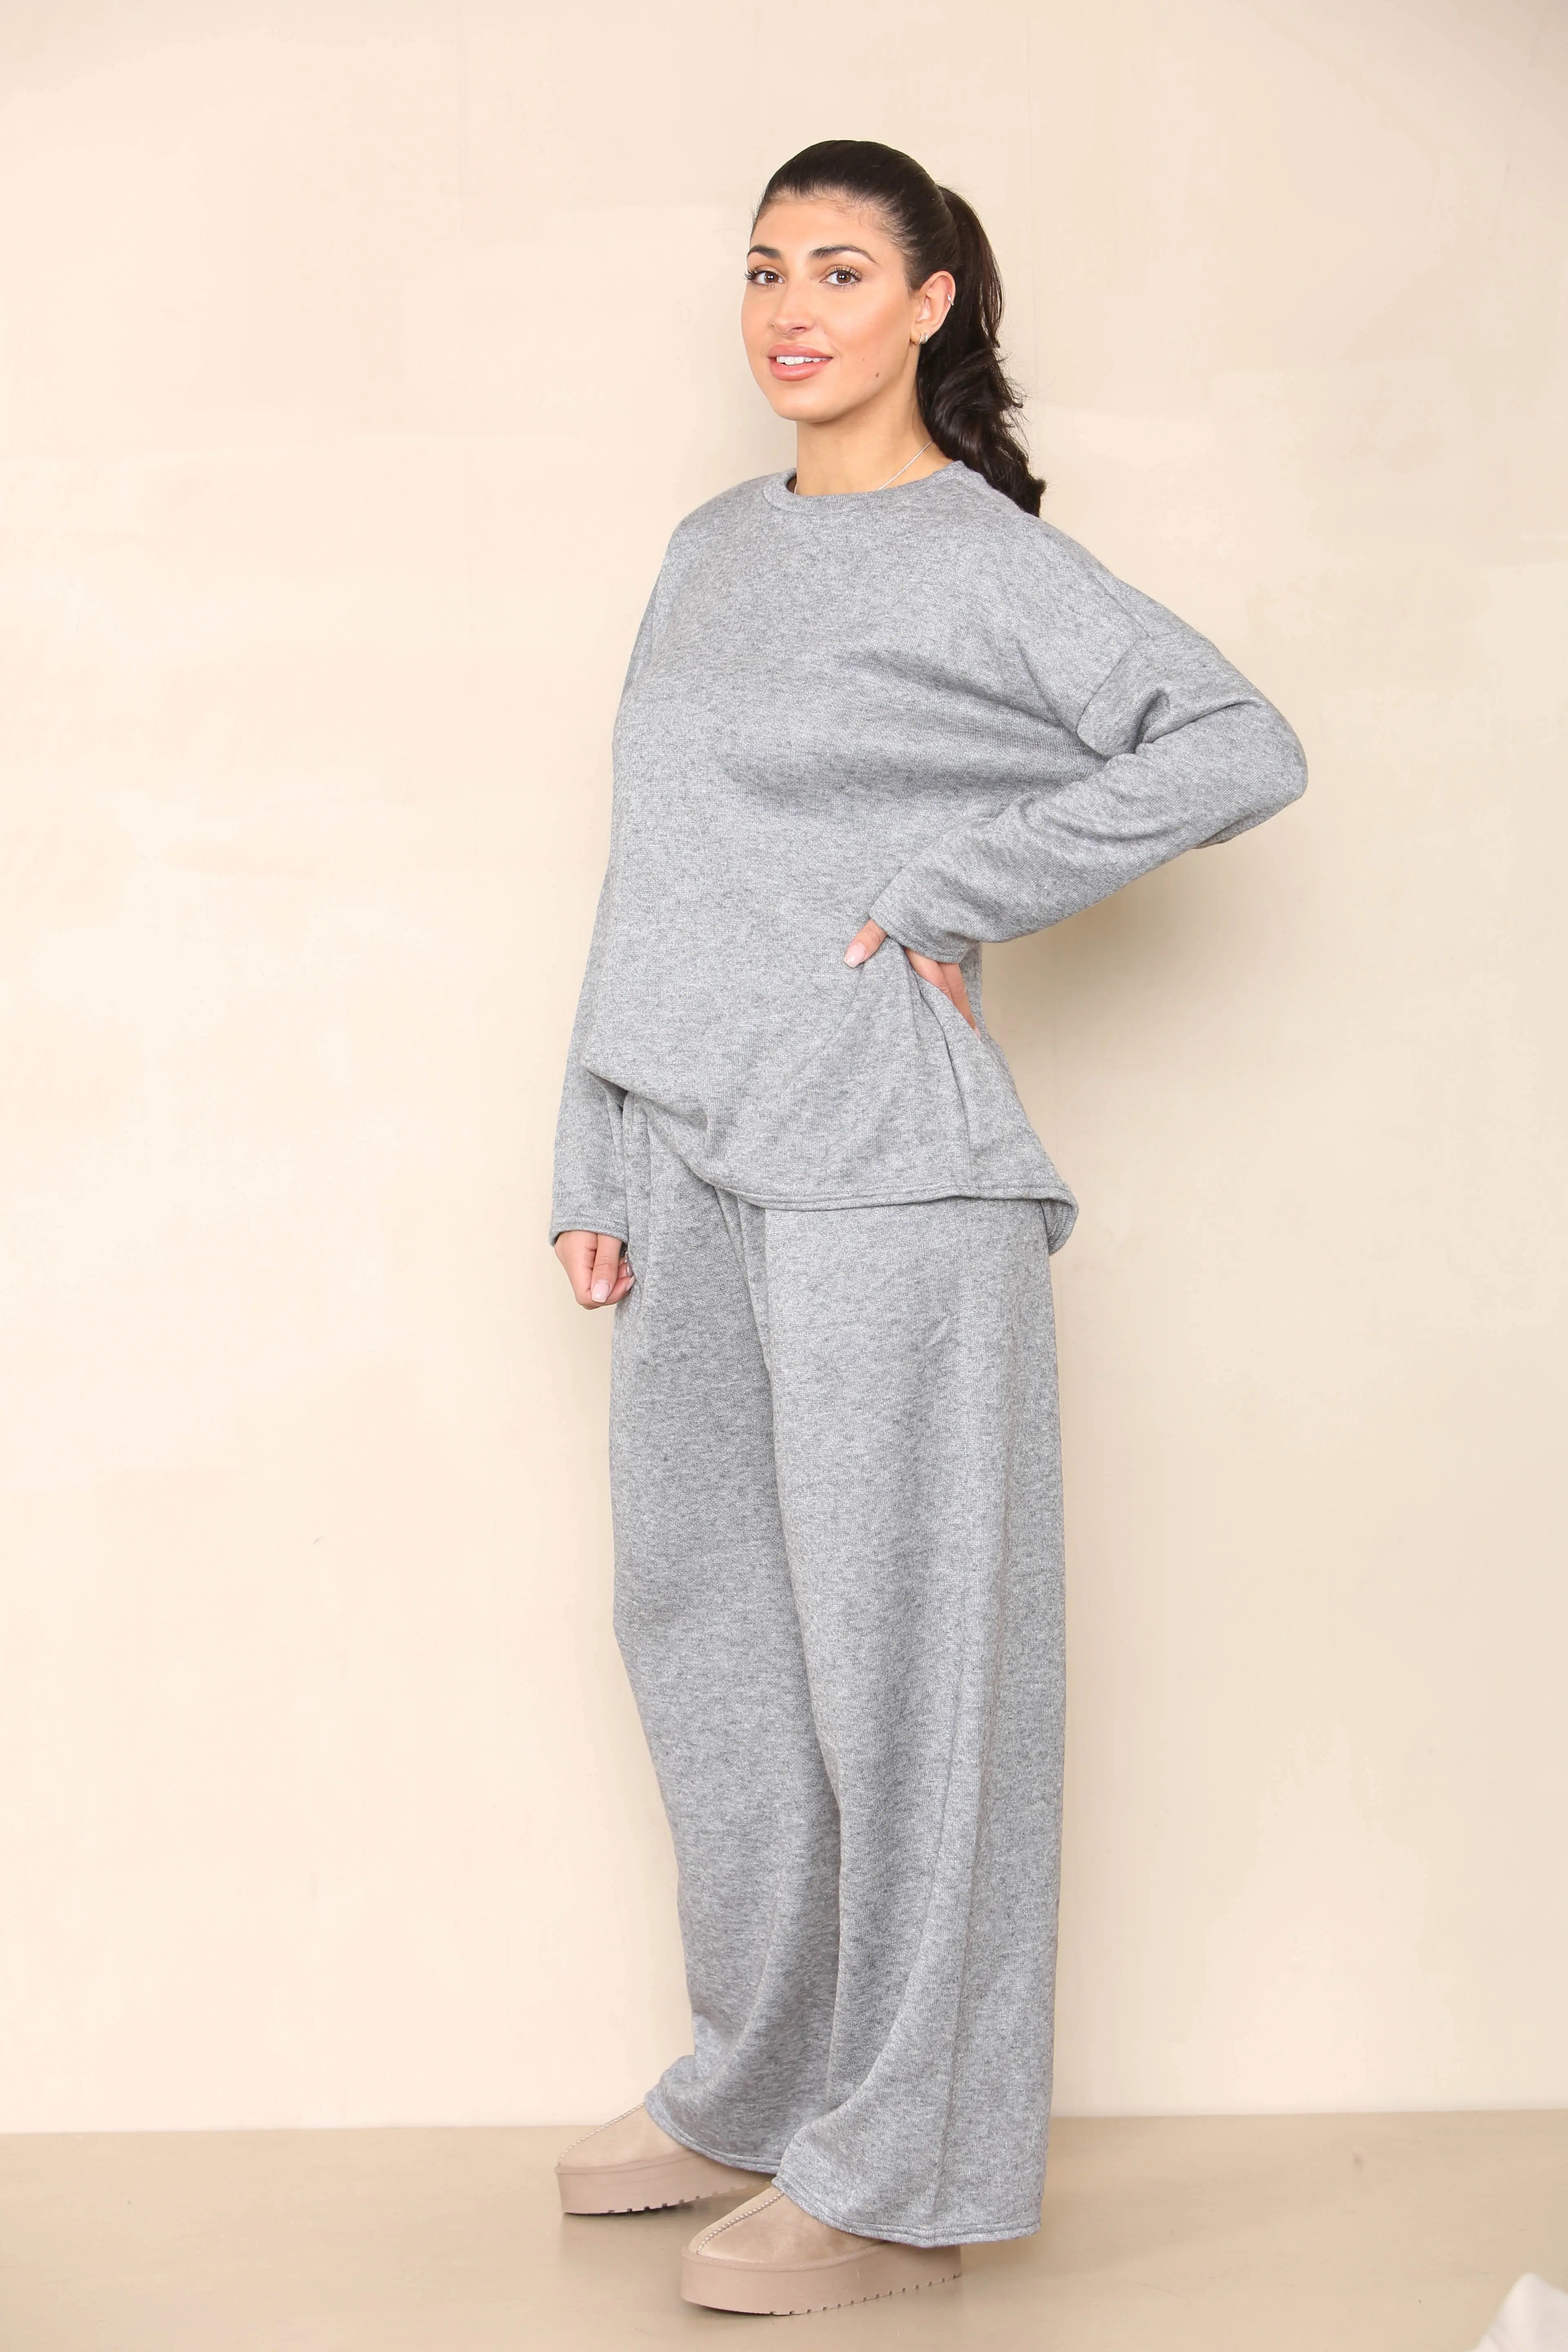 KATCH ME Grey Casual Long Sleeve Top & Wide Leg Pants Co-ord Co-ord